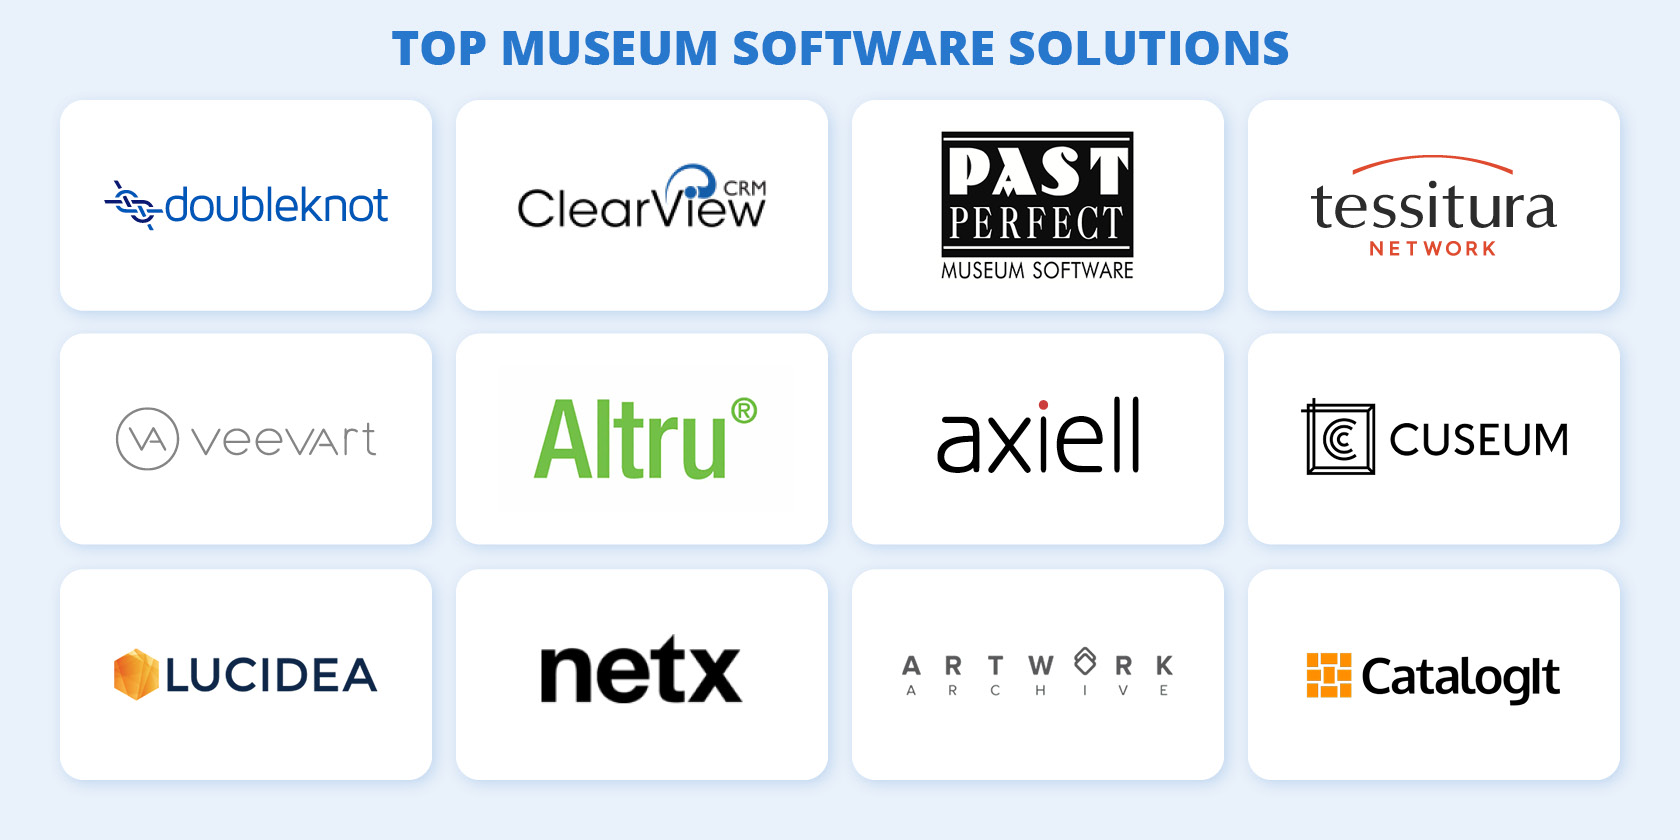 This graphic shows the logos of 12 top museum software solutions, each of which is discussed in the text below.